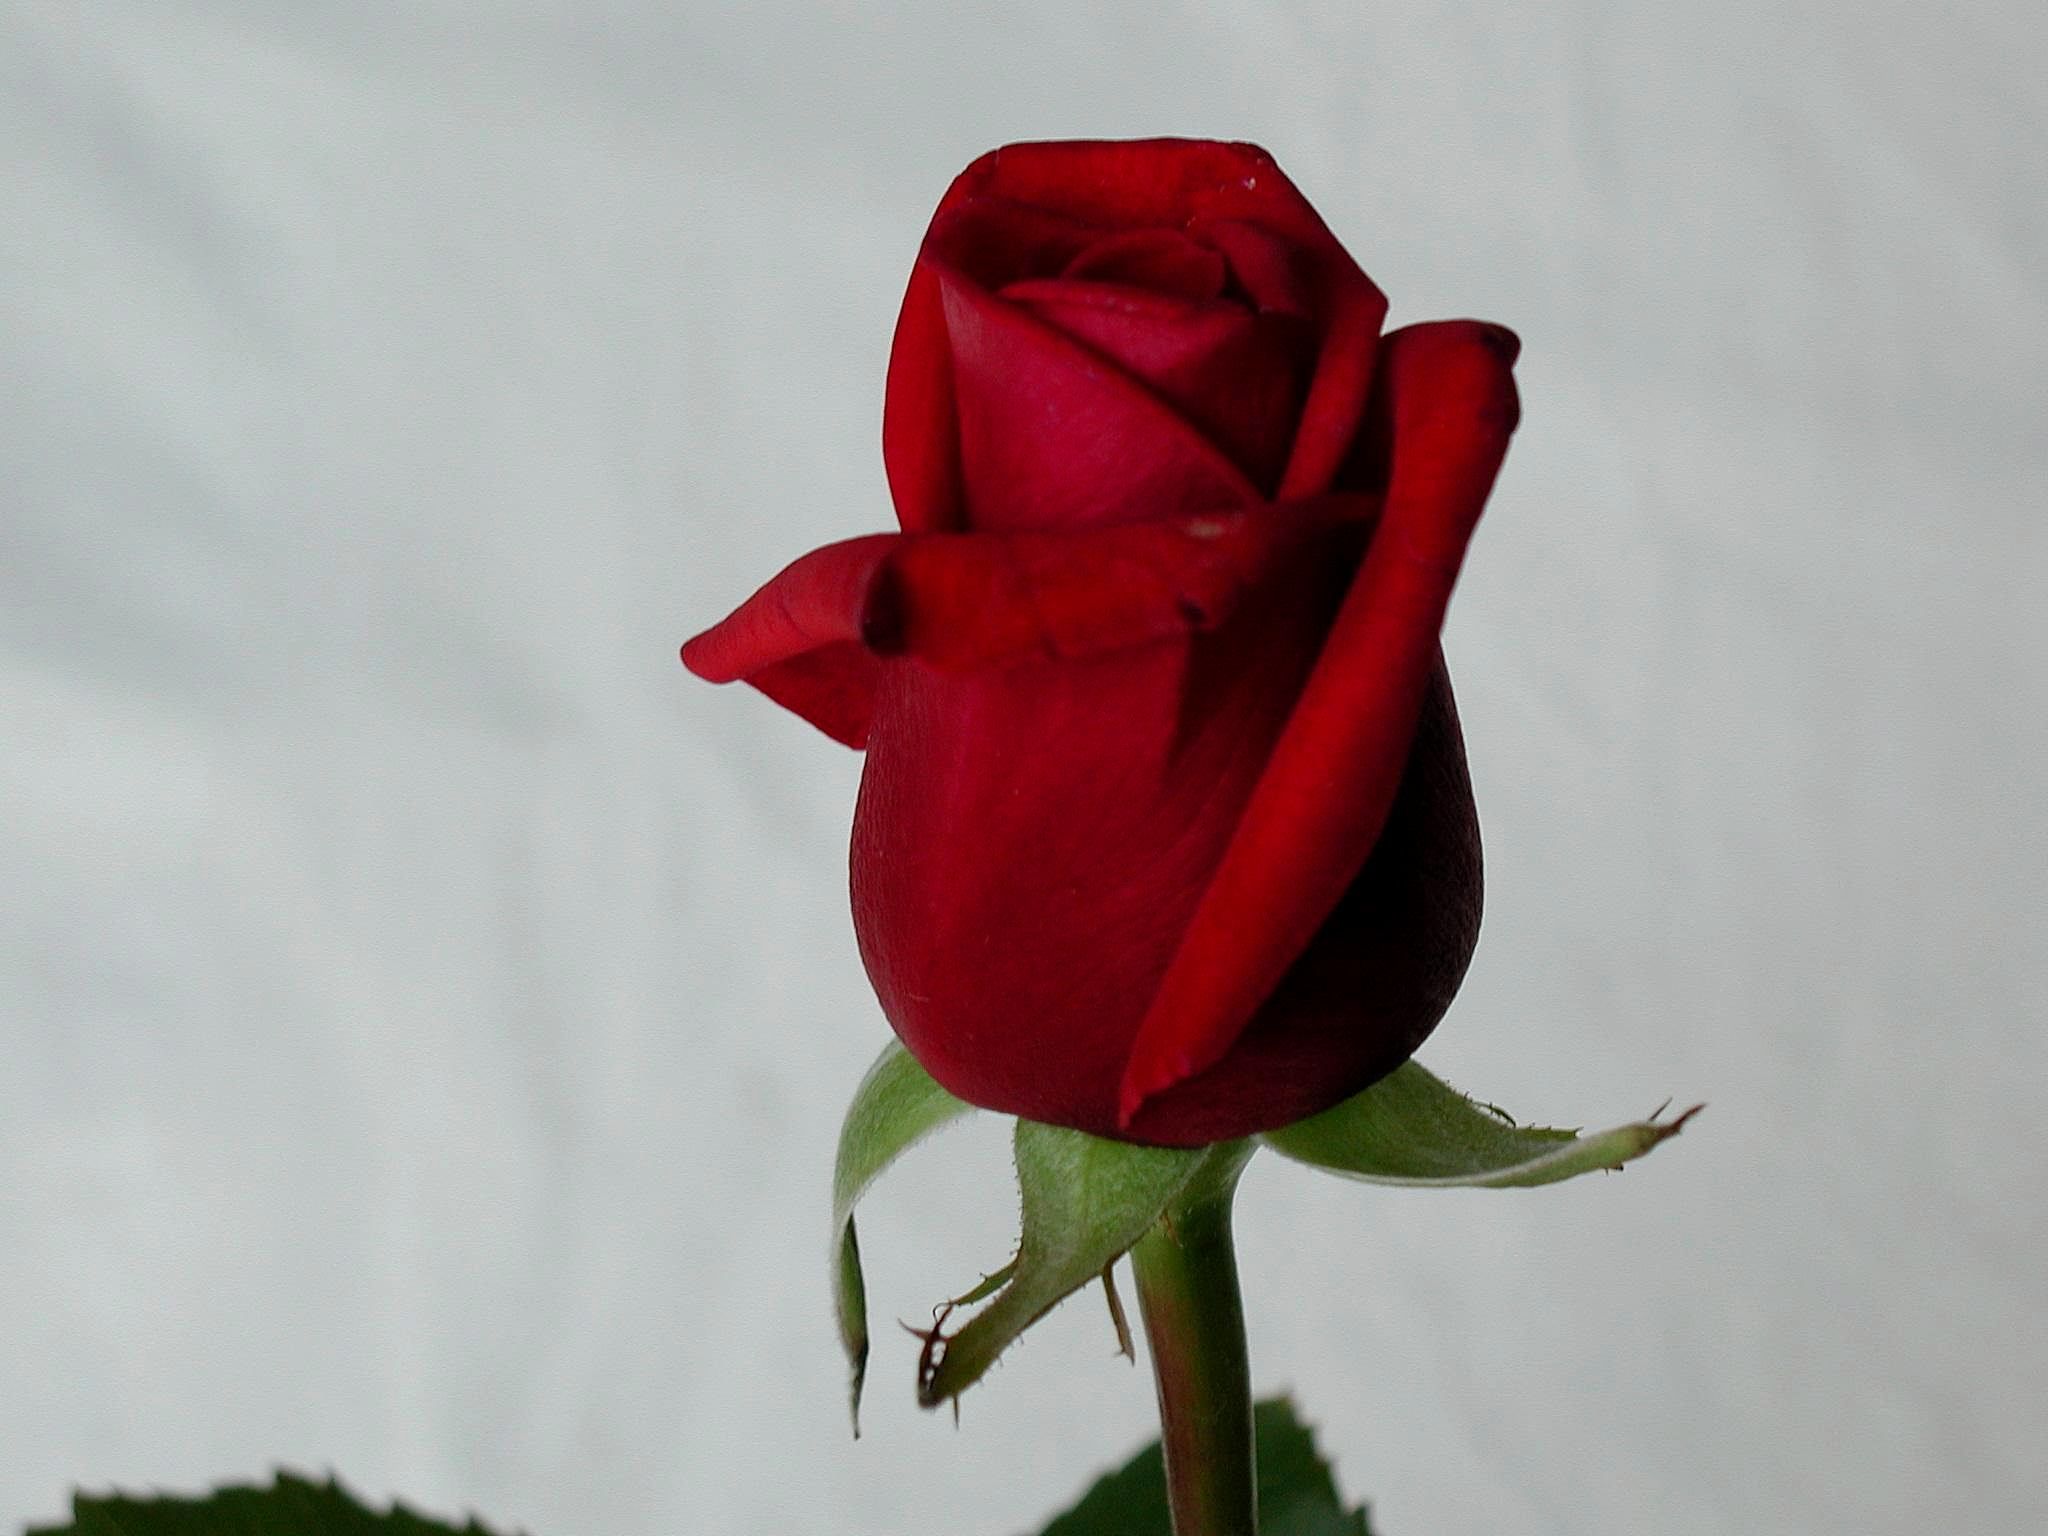 File:Red rose stock image.jpg - Wikimedia Commons